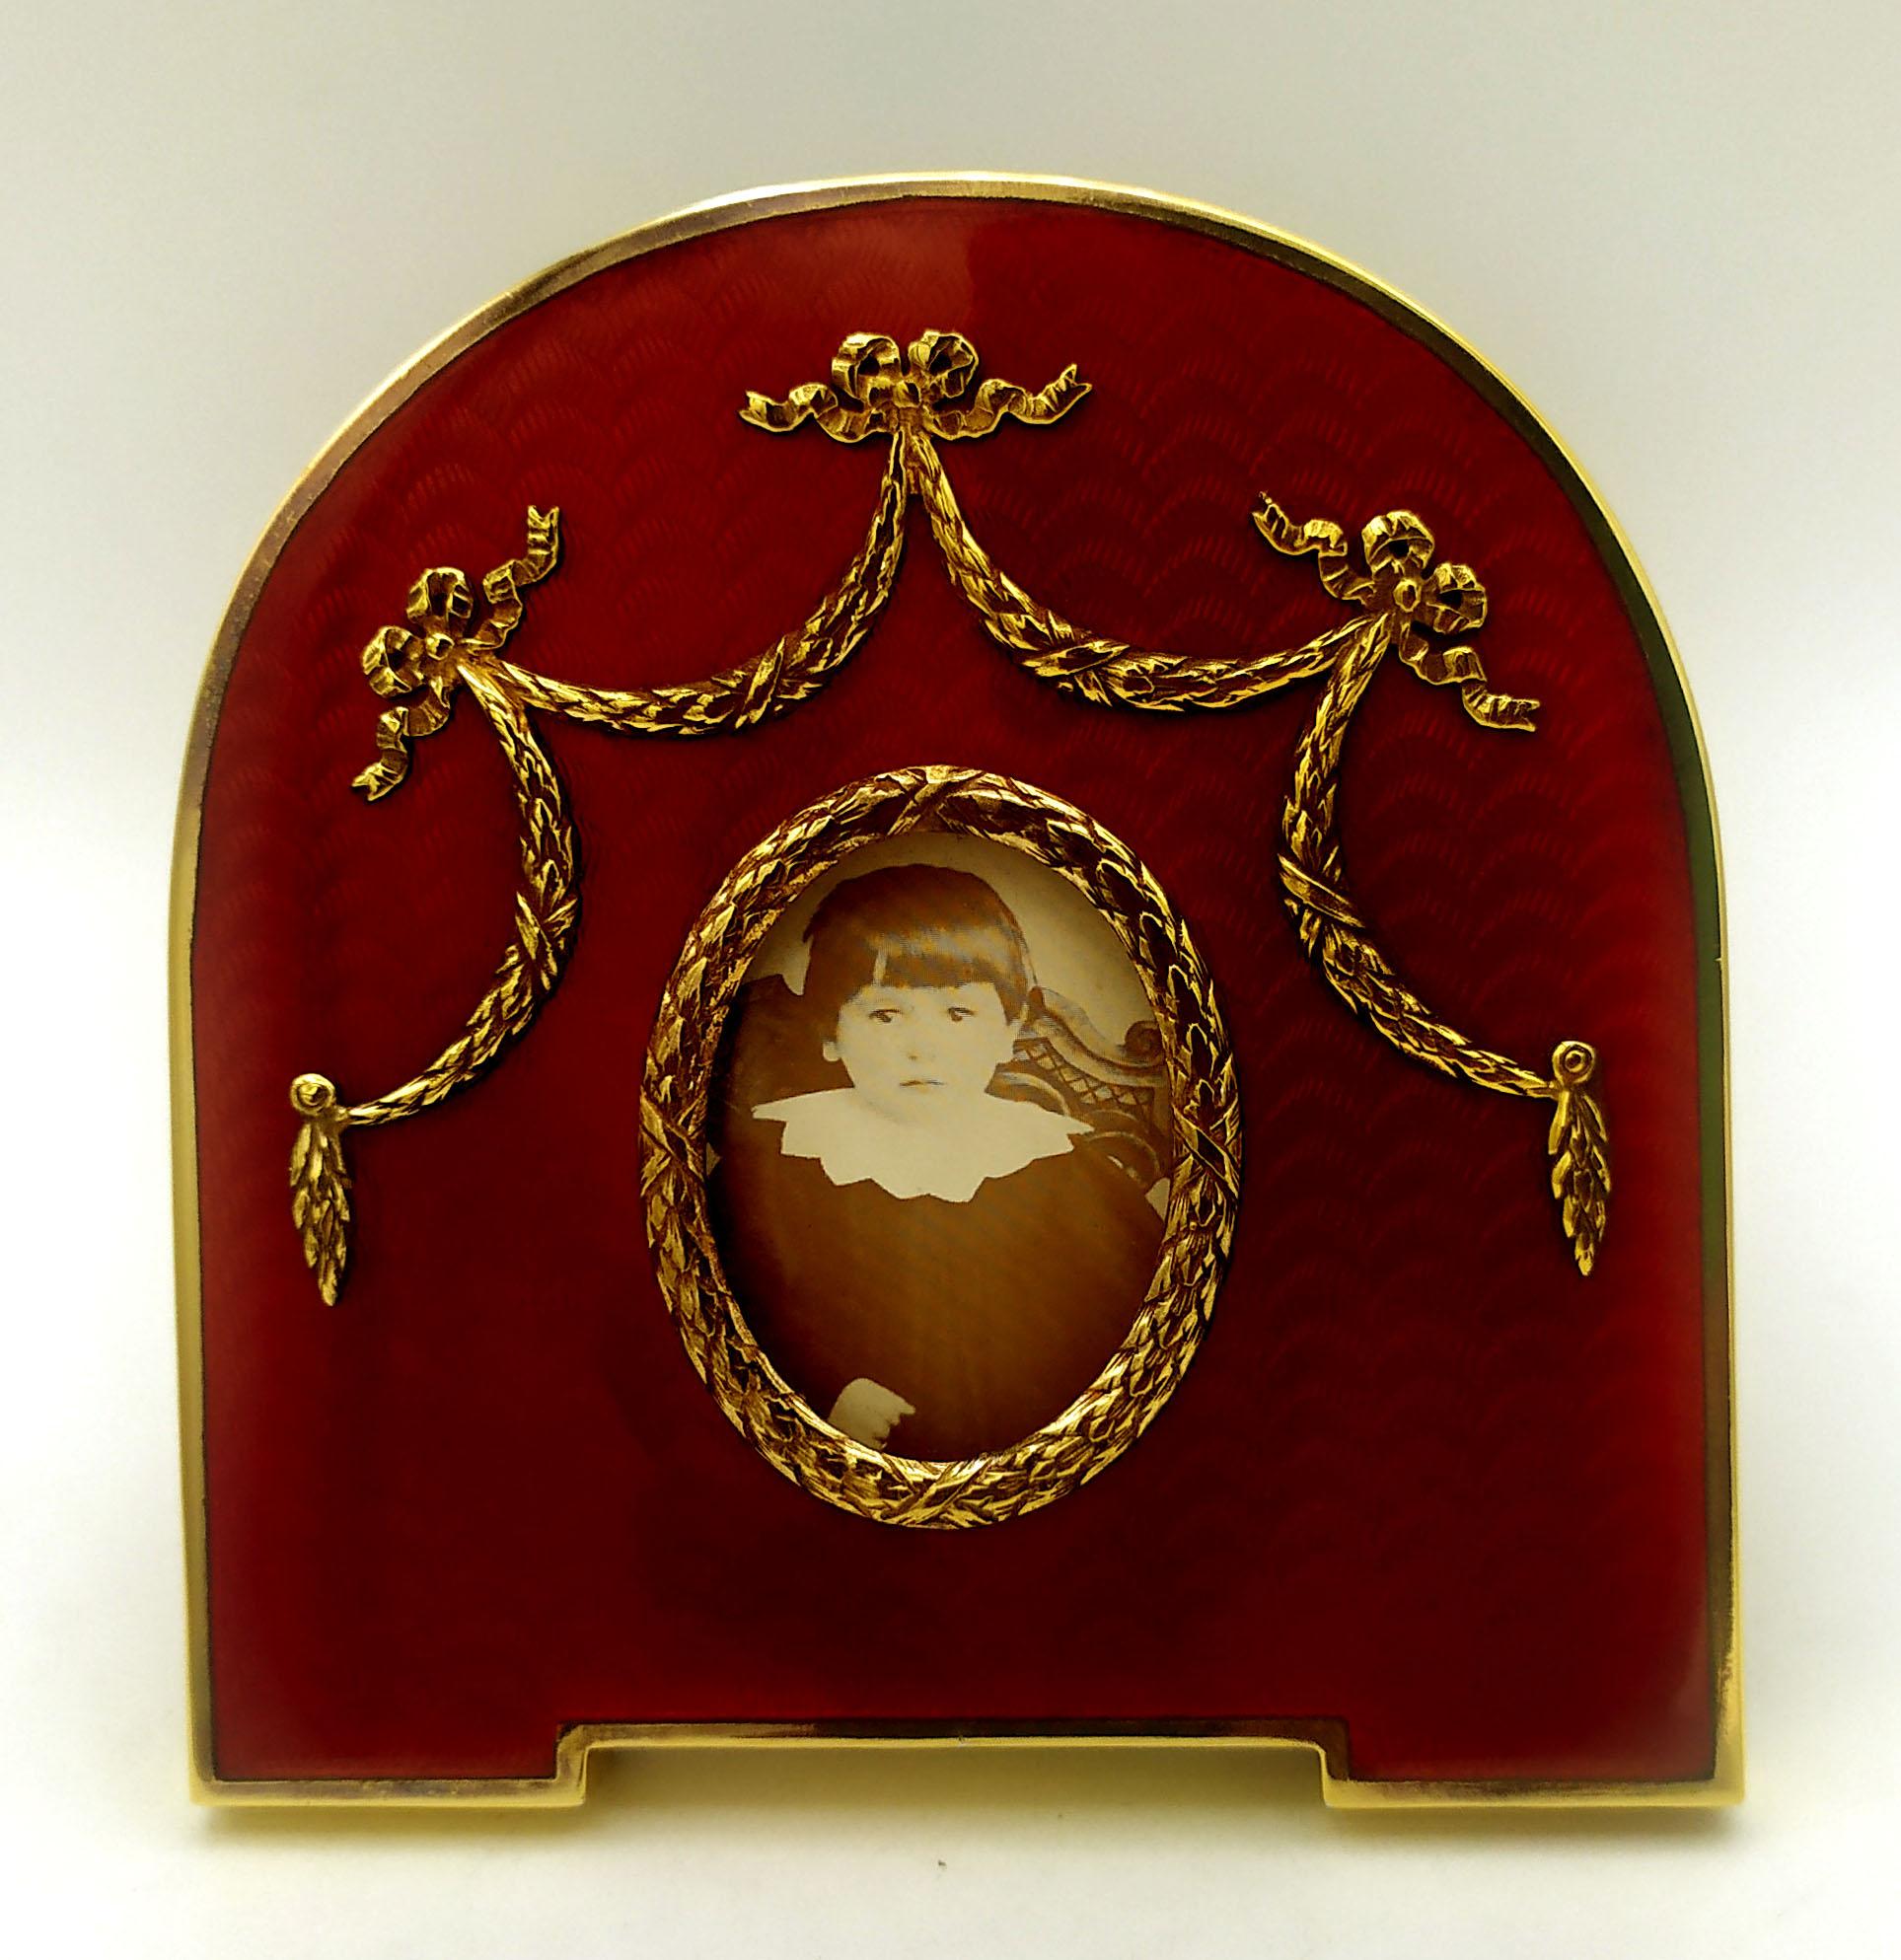 Shaped oval photo frame in 925/1000 sterling silver gold plated with translucent fired enamel on guillochè and Louis XVI French Empire style ornaments. External dimensions cm. 13.5 x 11. Internal oval cm. 3.2 x 4.2. Weight gr. 158. Designed by